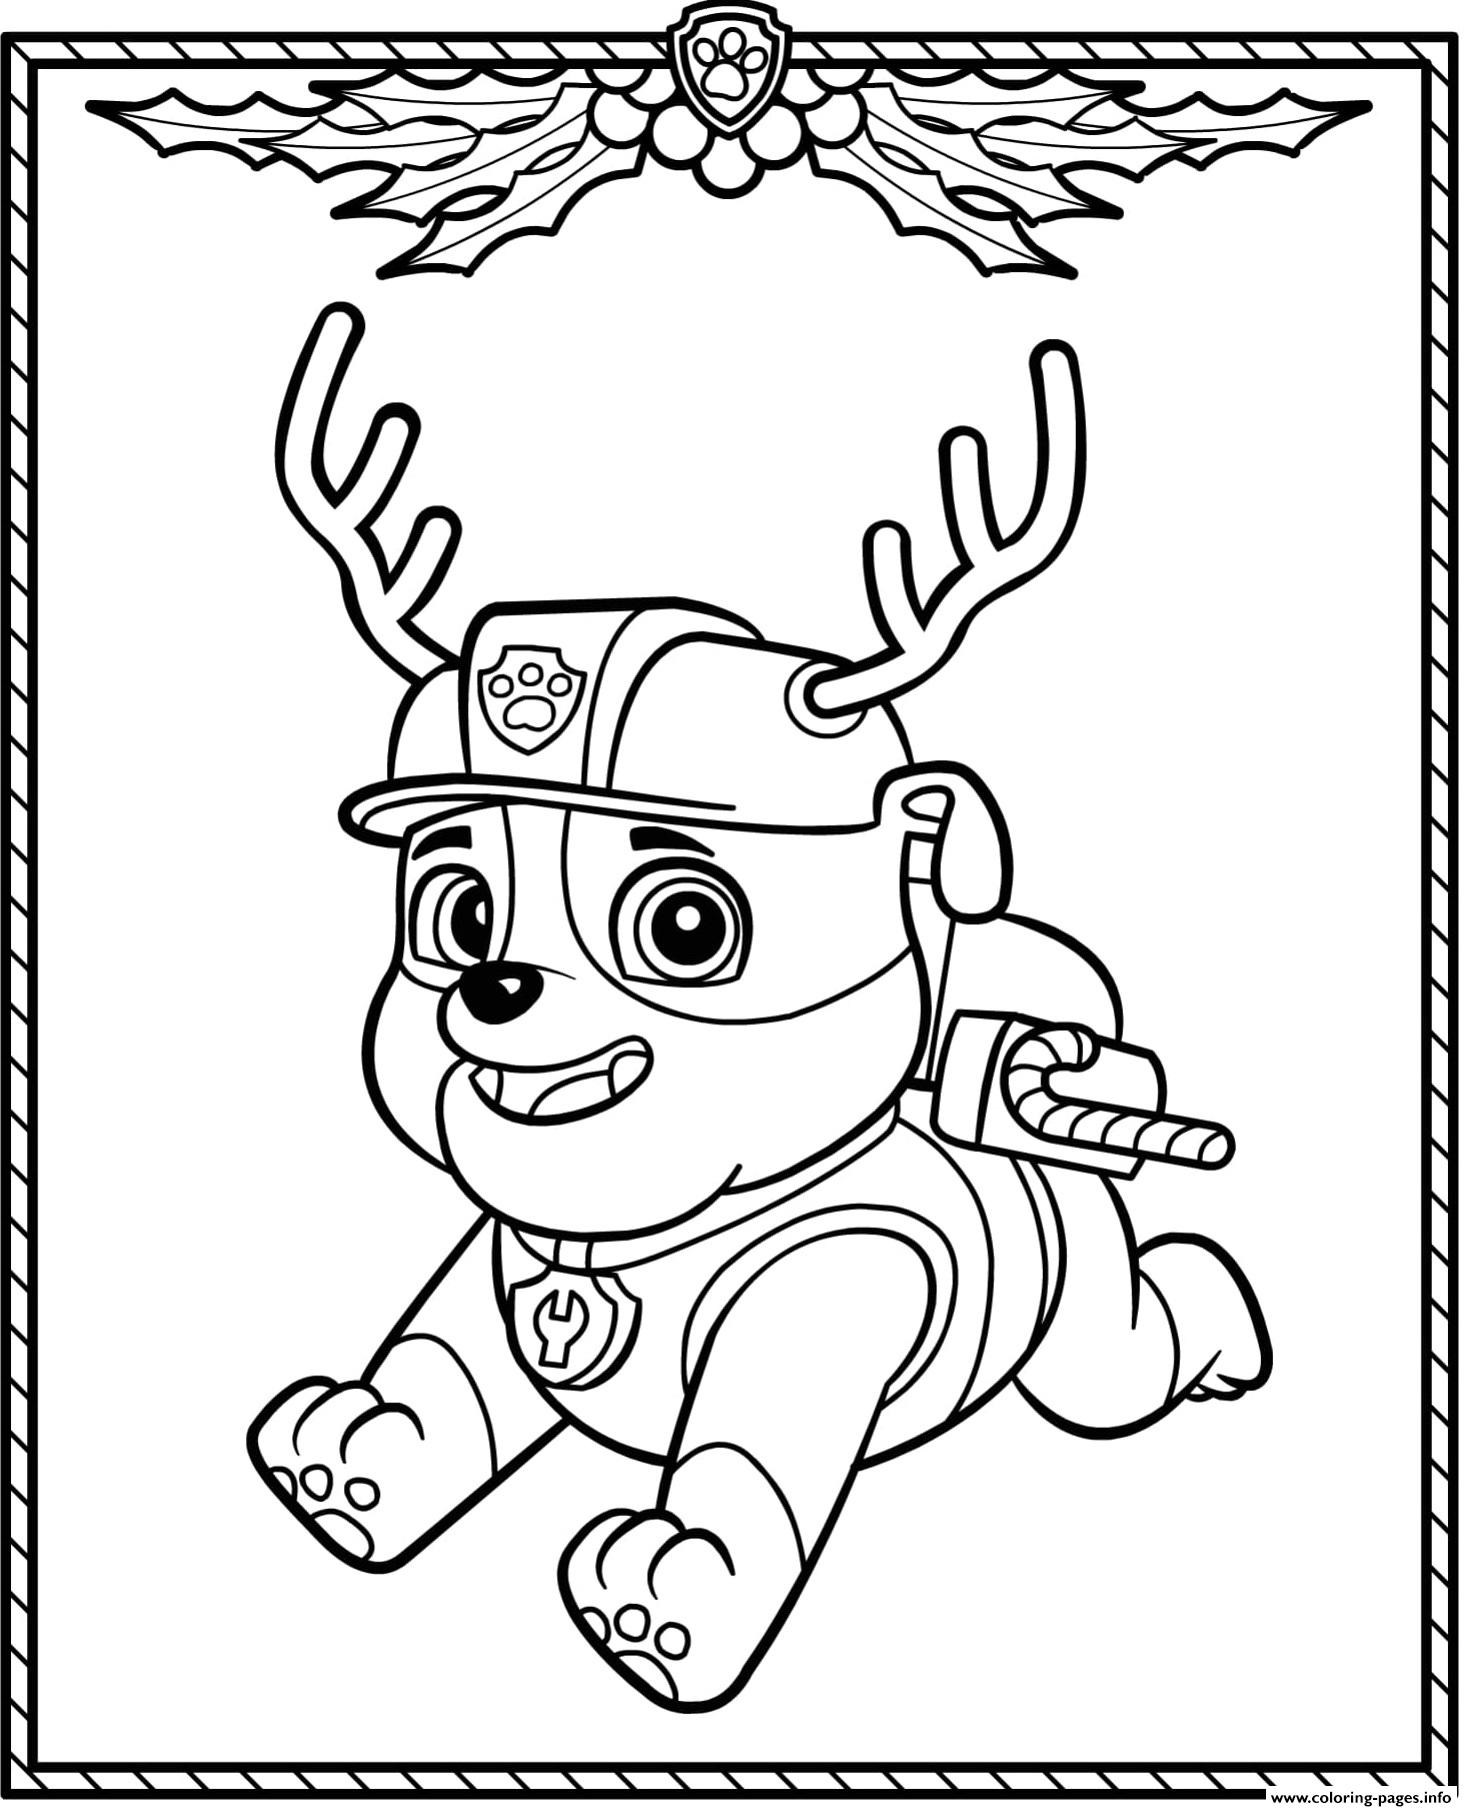 Download Paw Patrol Christmas Coloring Pages - Coloring Home